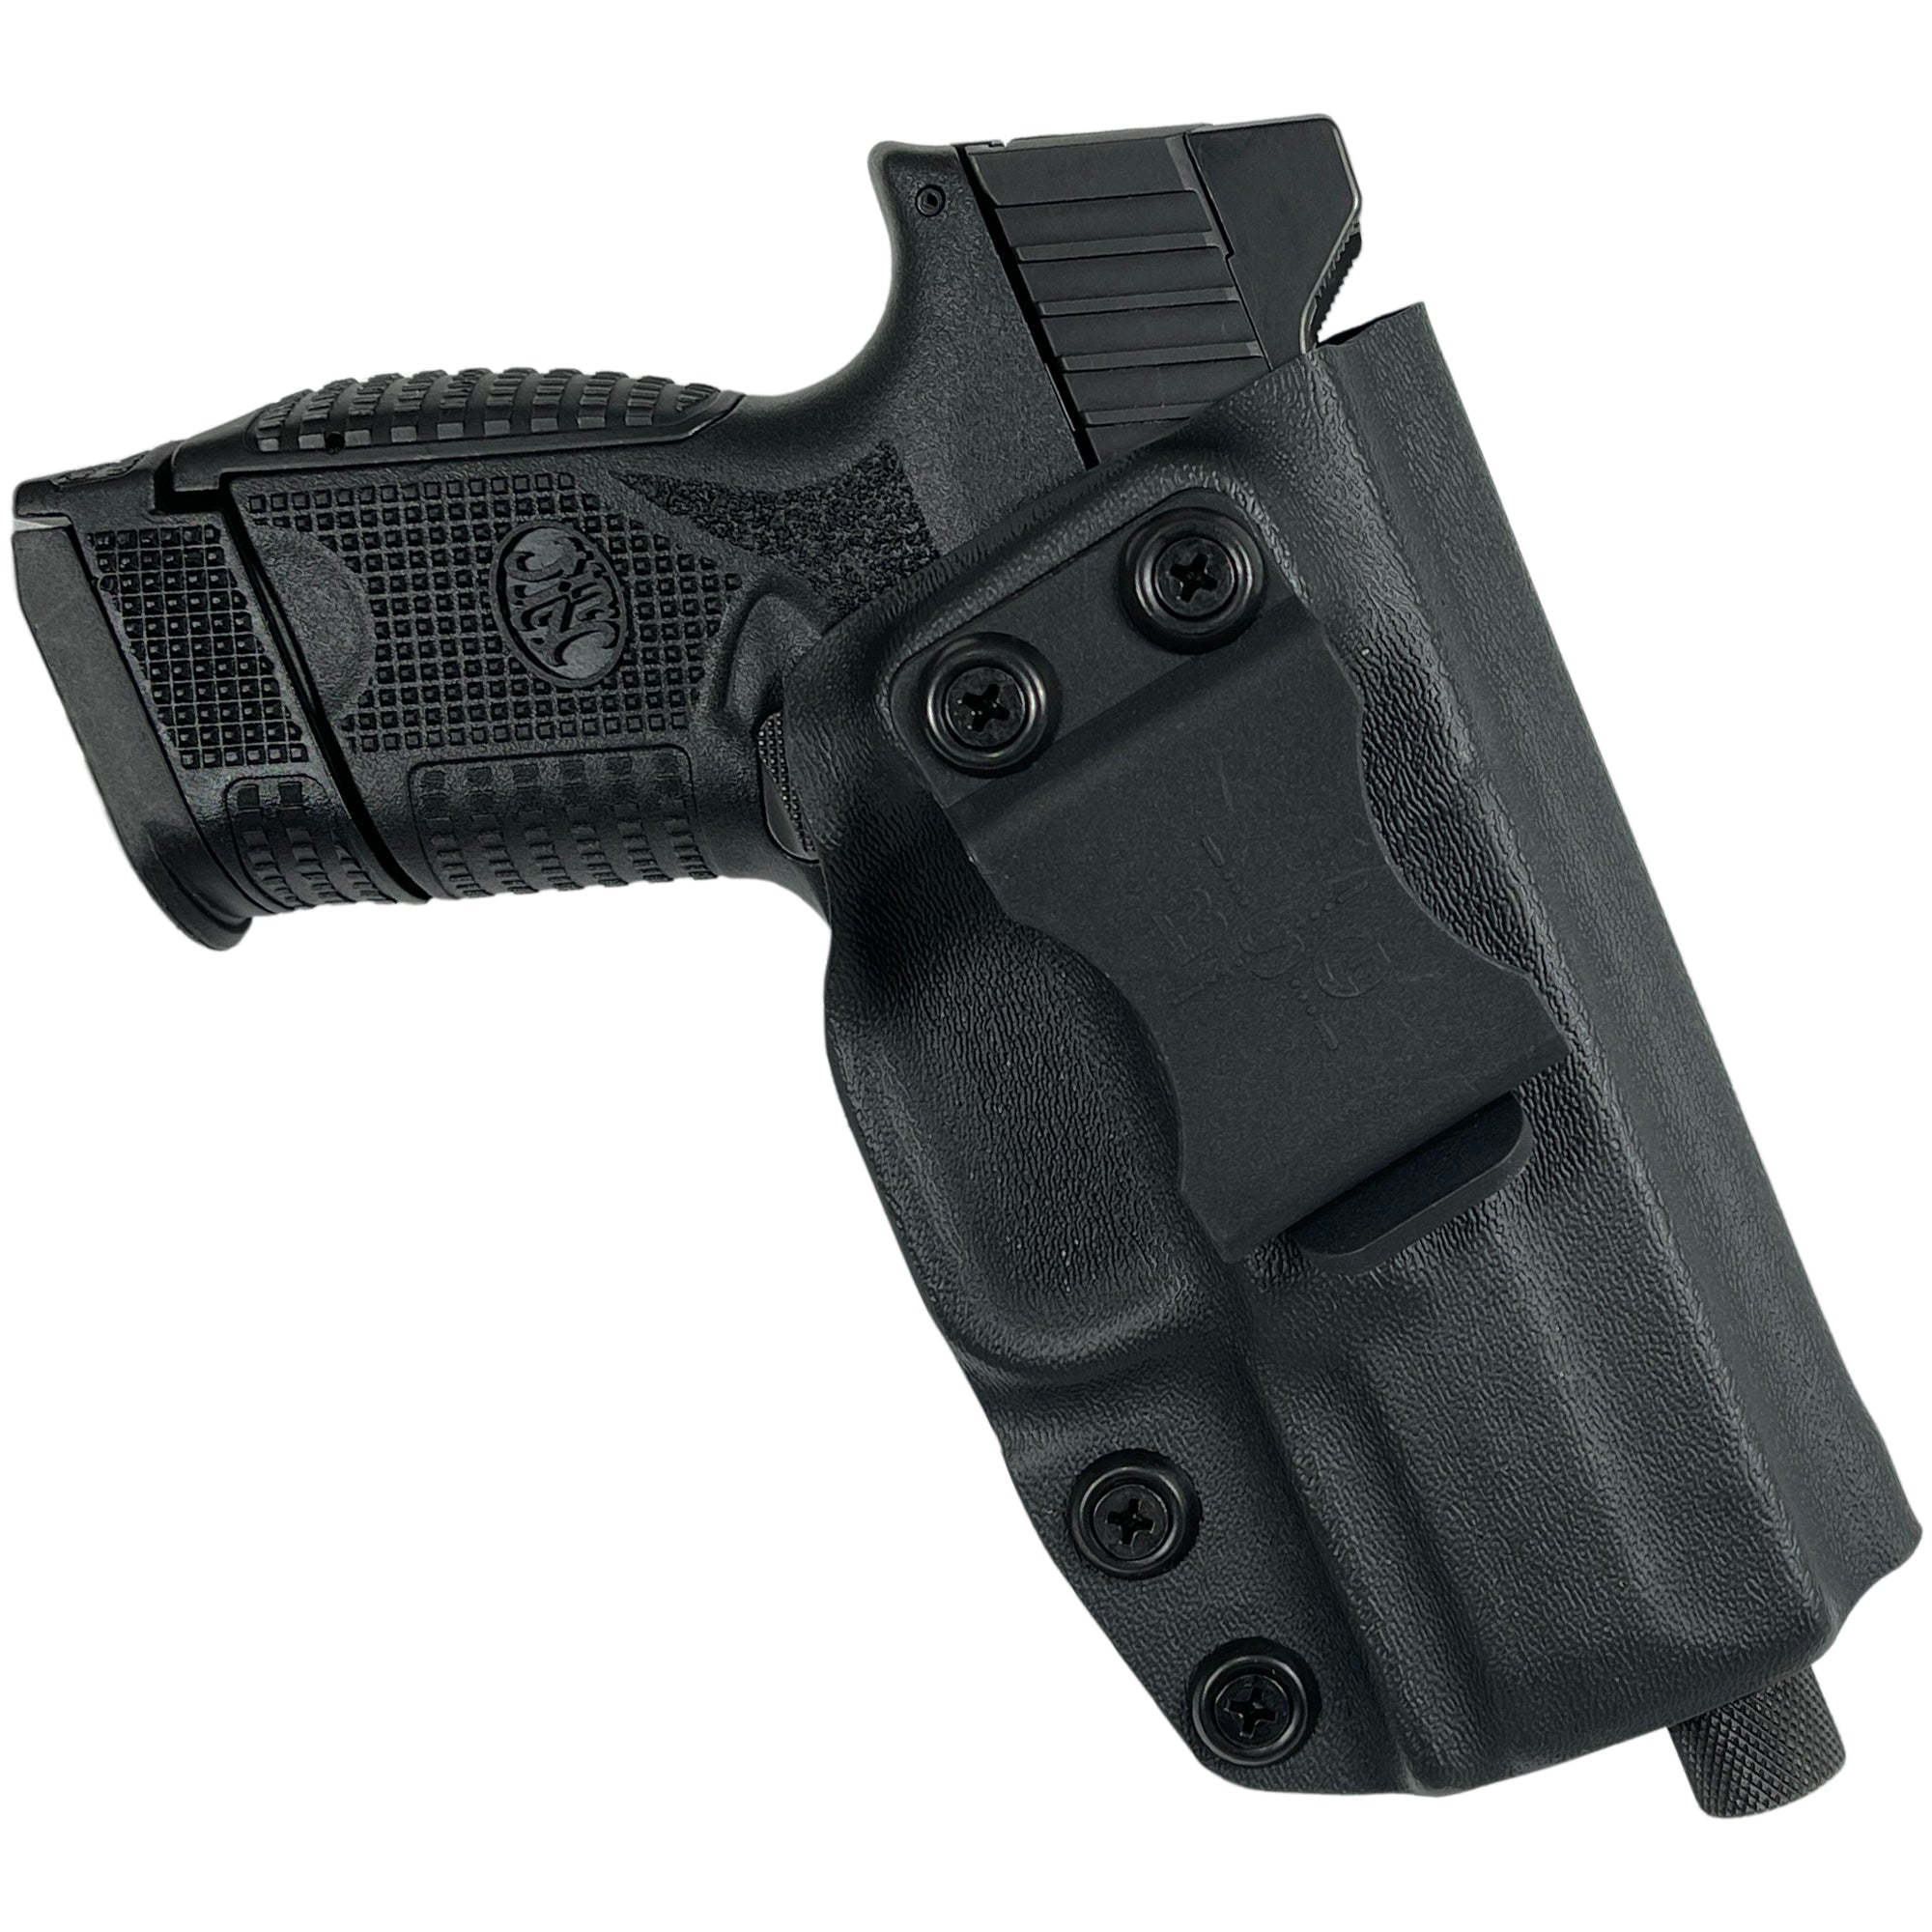 FNH 509 Compact/Midsize IWB Full Profile Holster